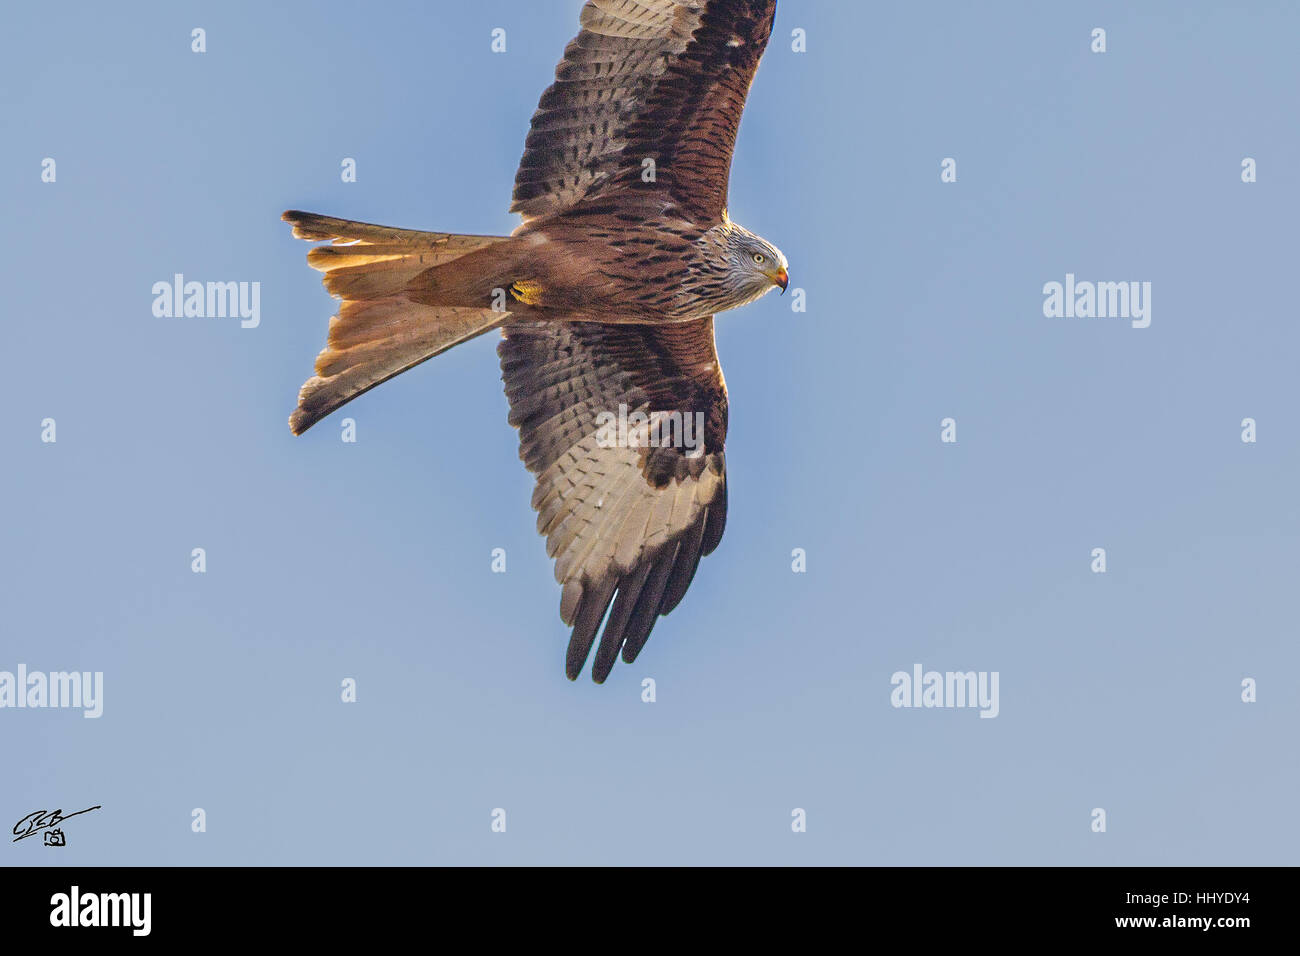 Red kite hovering with a blue sky as background. Stock Photo